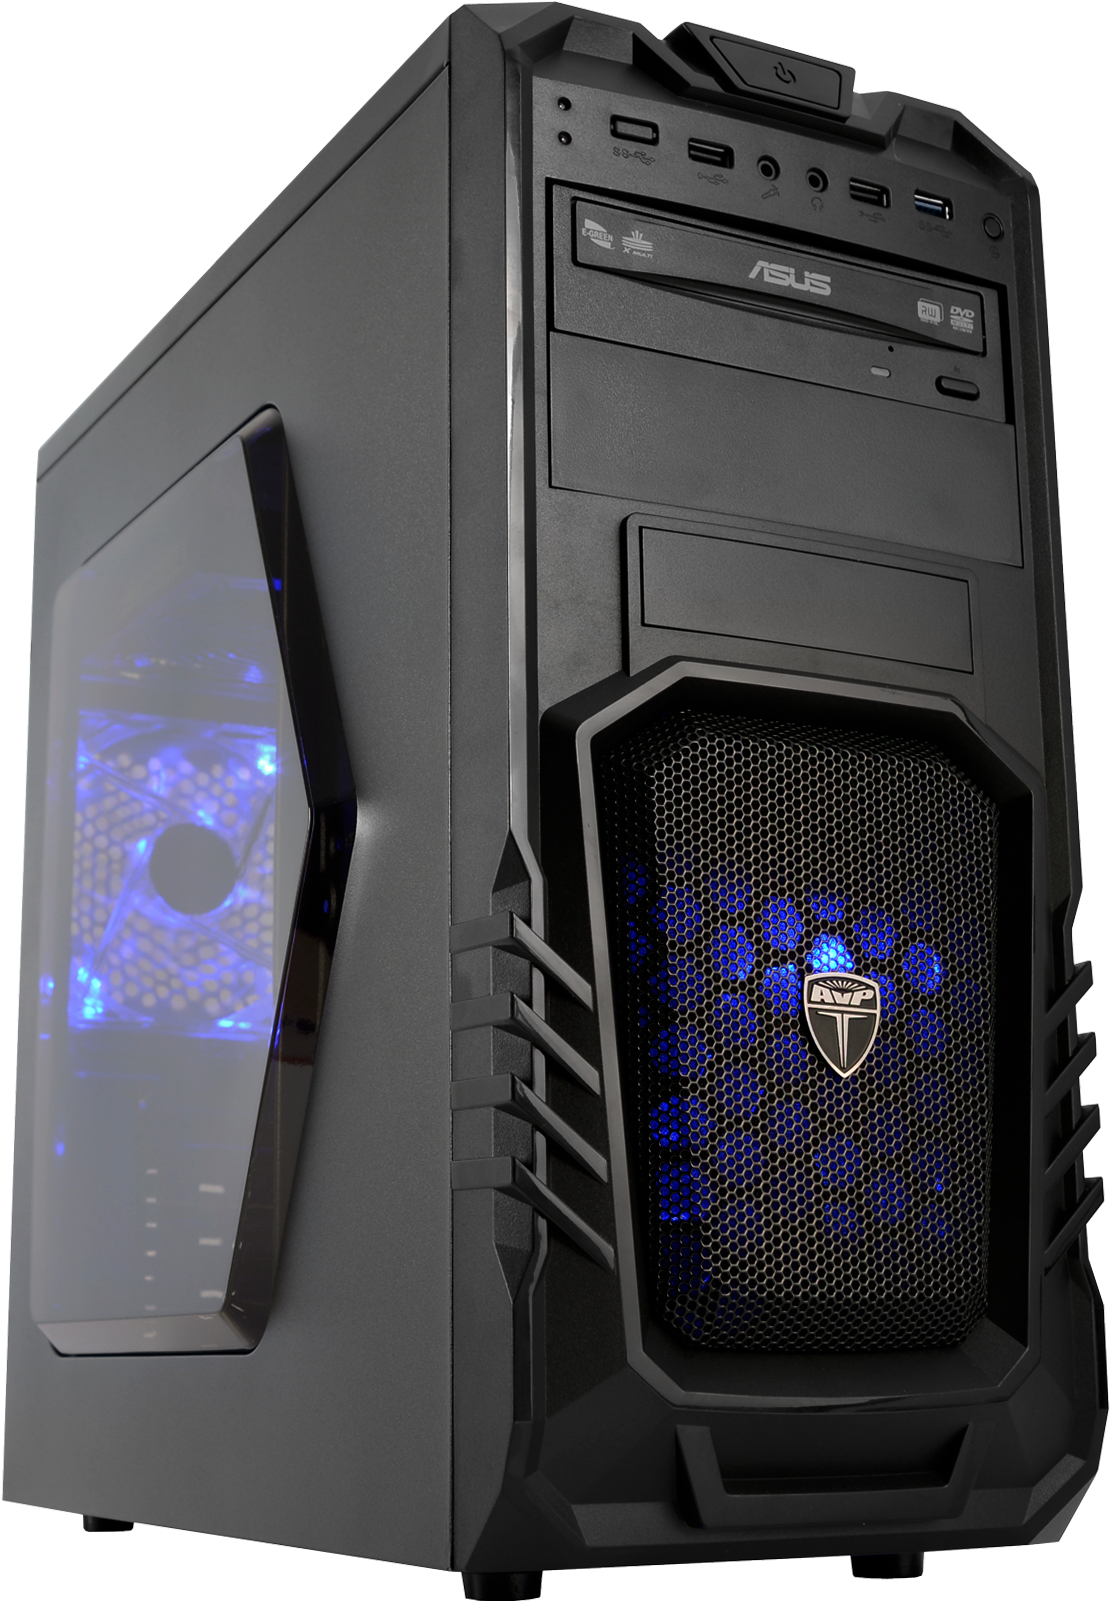 A Black Computer Tower With Blue Lights